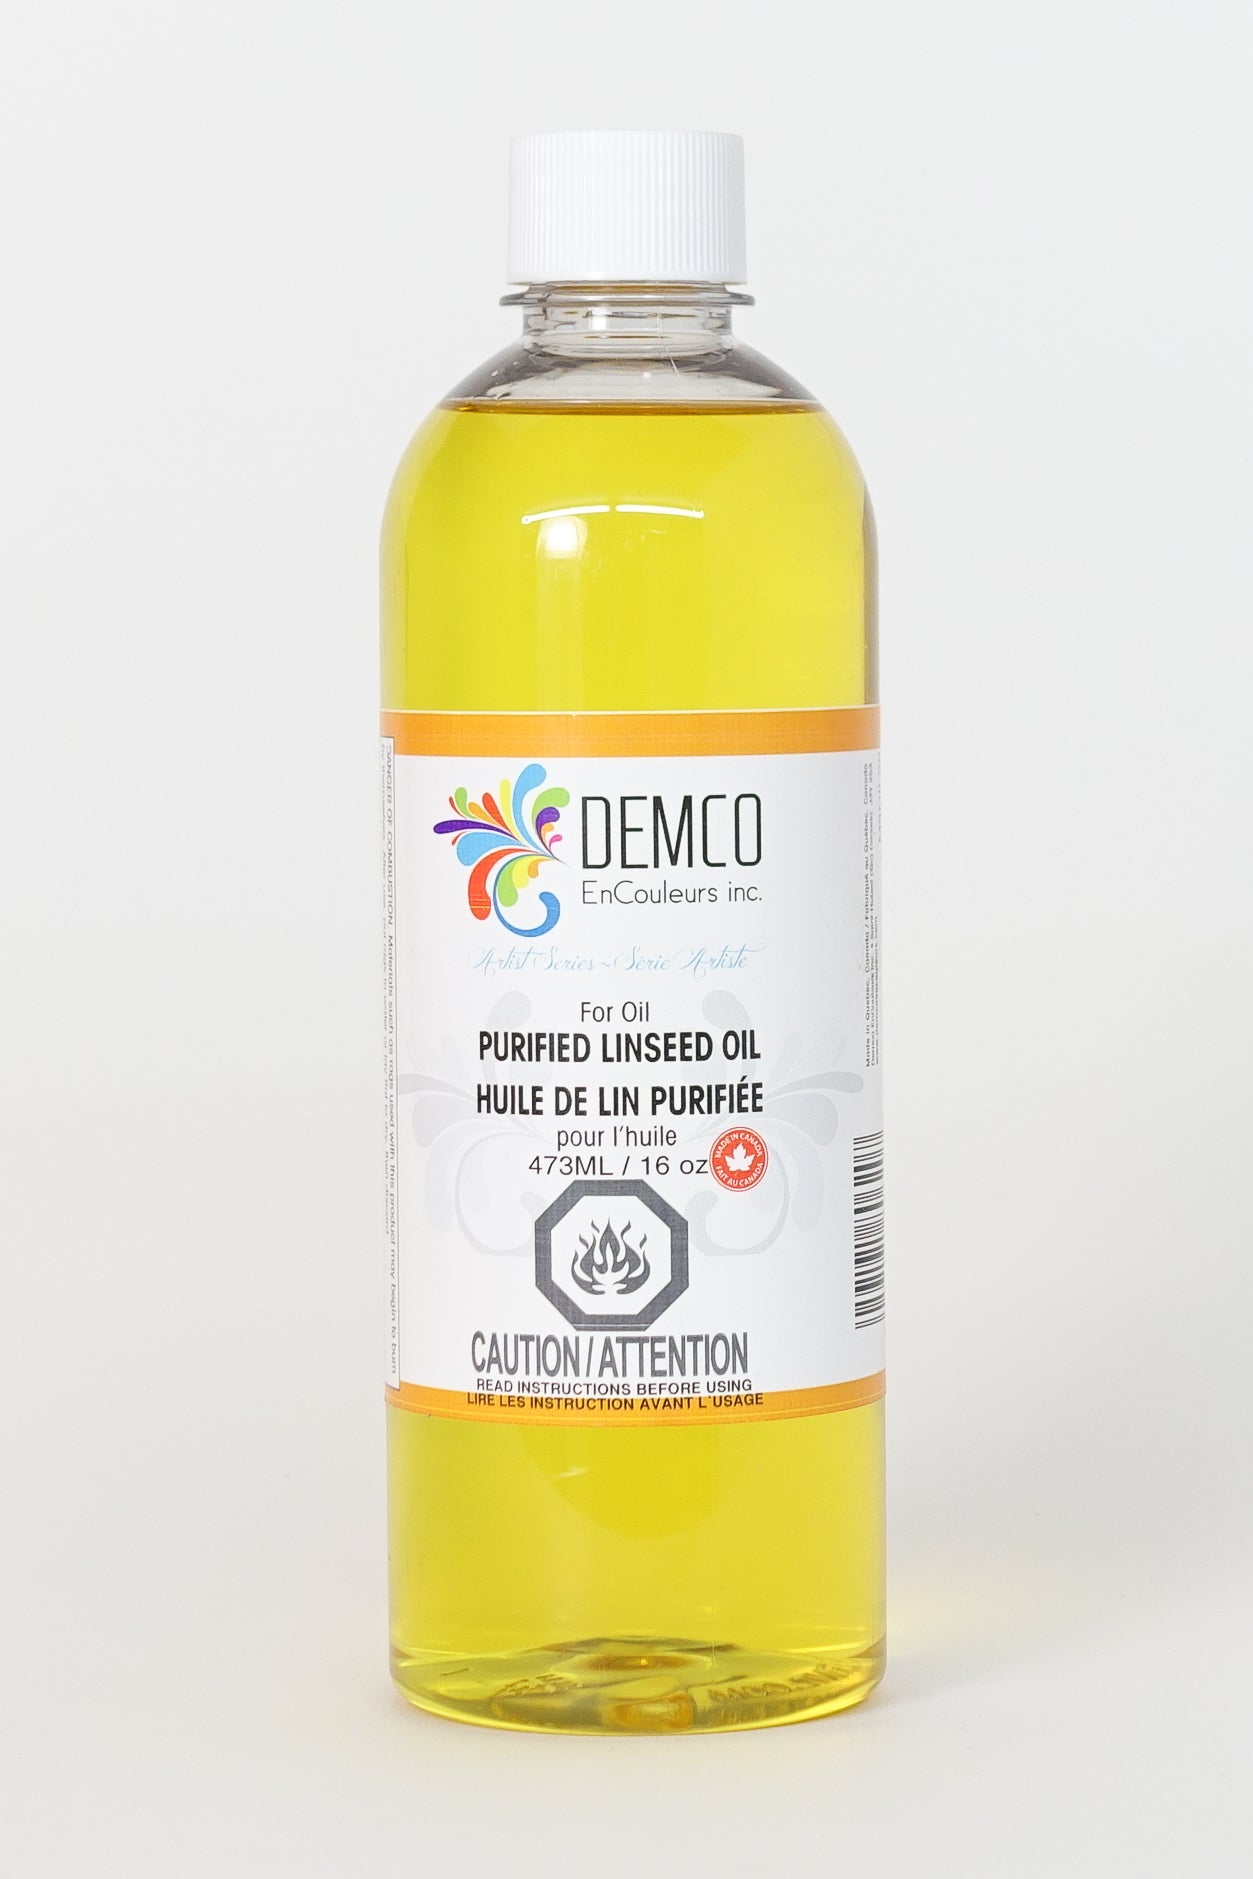 Purified Linseed Oil - Demco Encouleurs inc. (473ml)